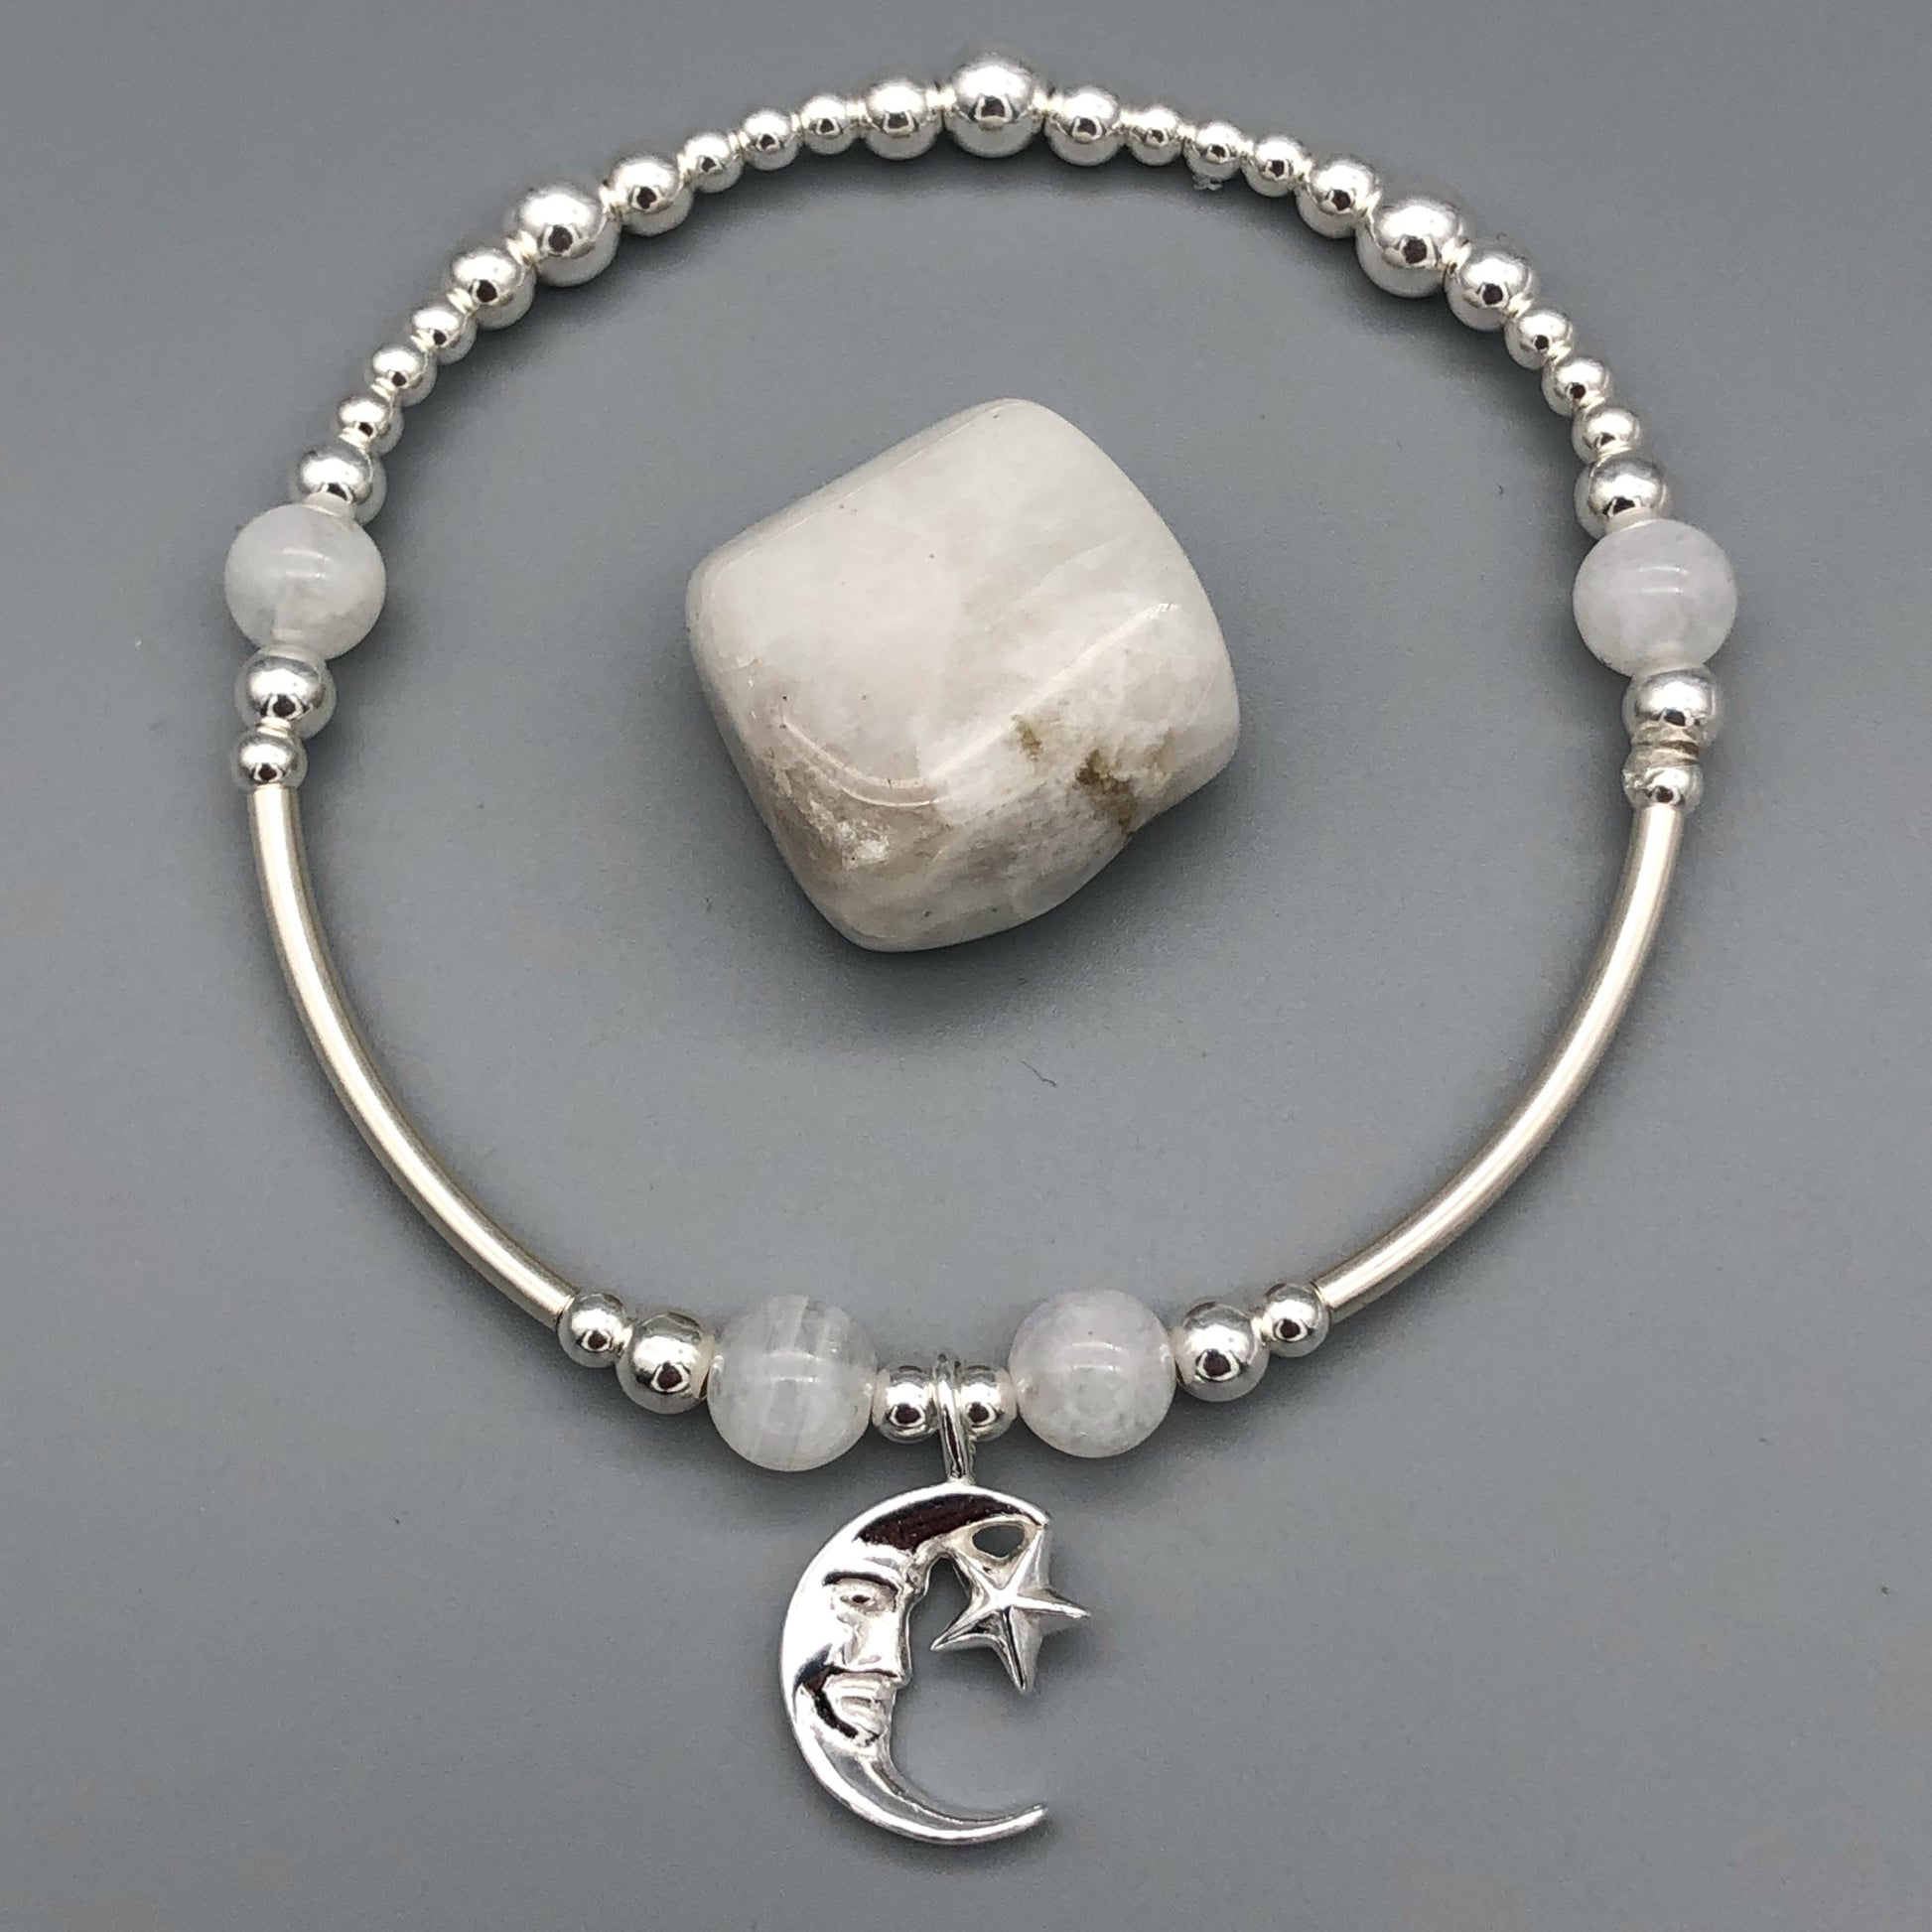 Moon & star charm & moonstone women's sterling silver stacking bracelet by My Silver Wish